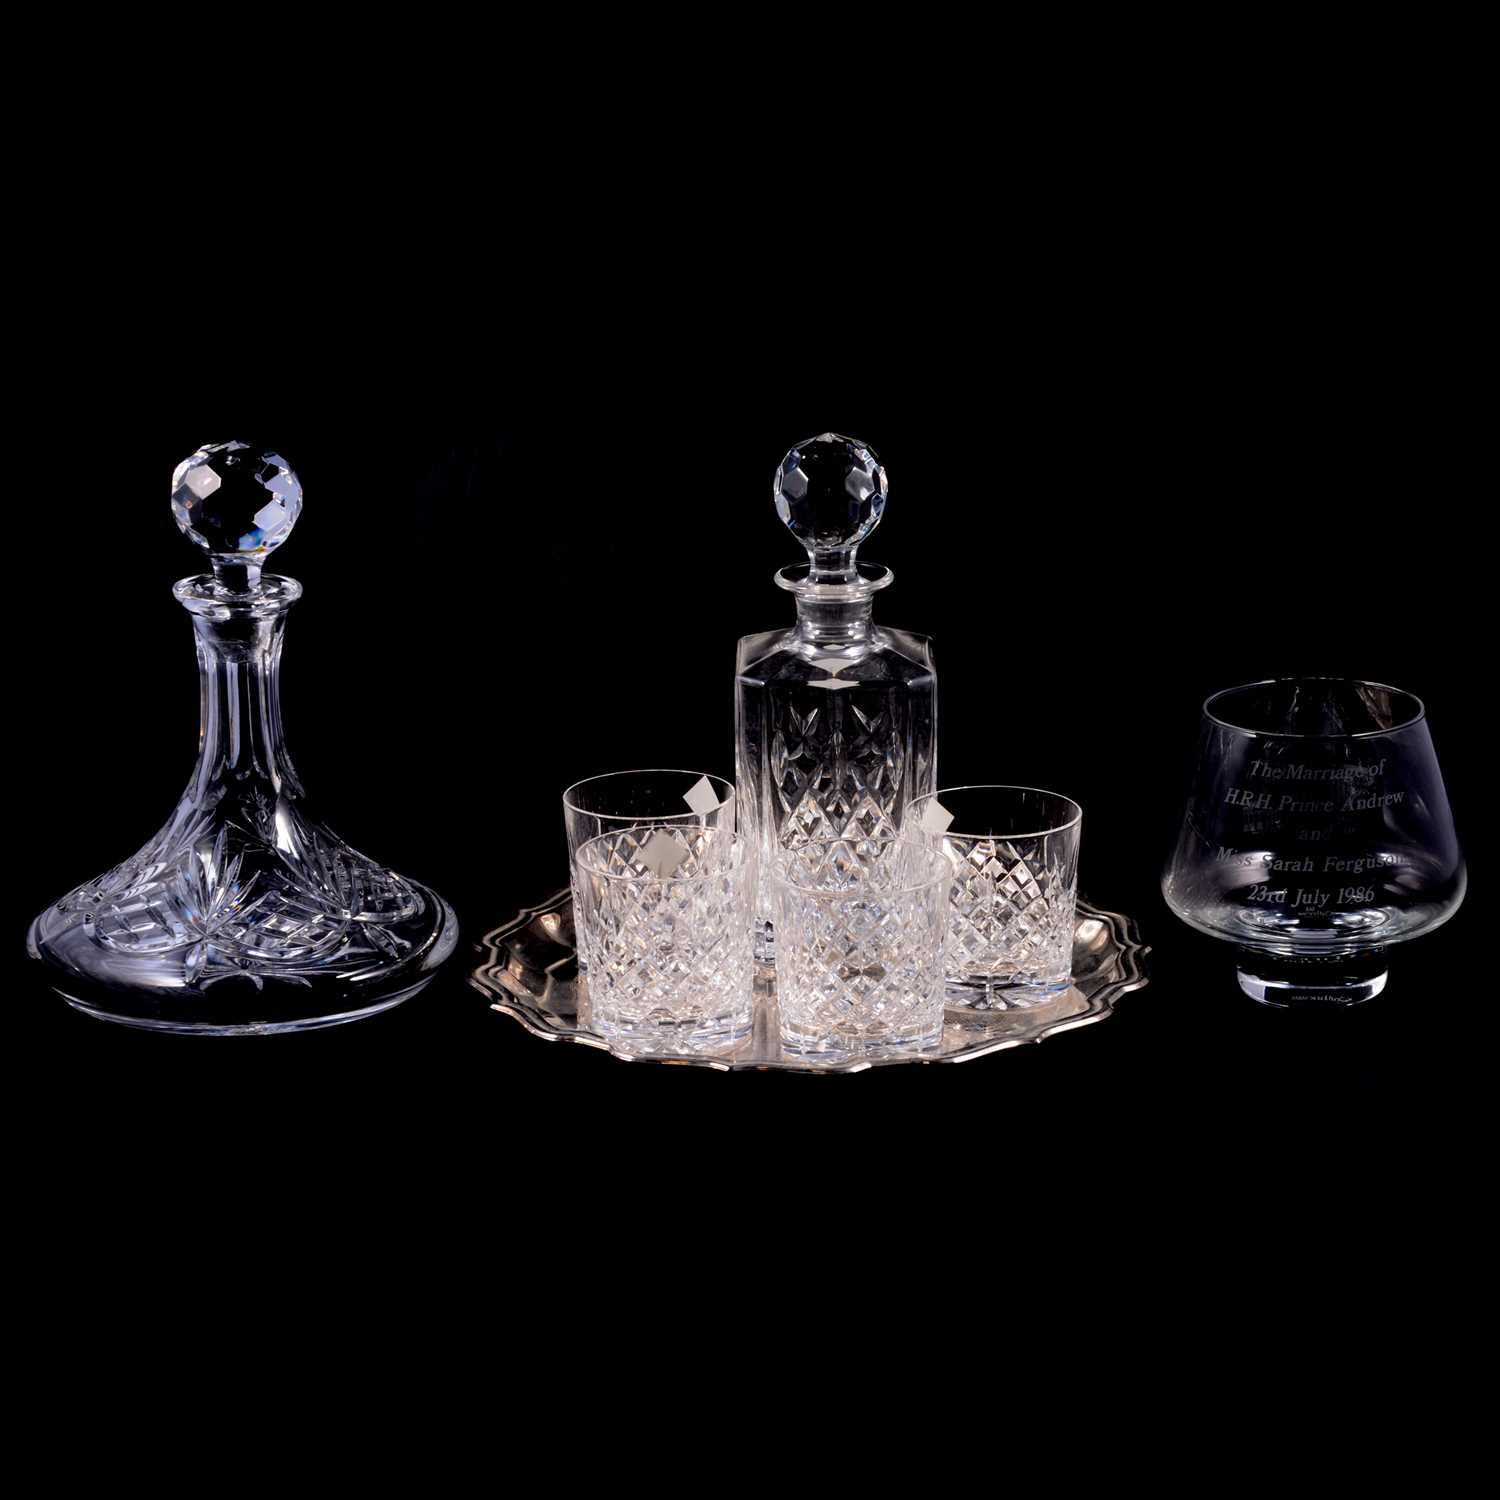 Collection of glasswares, Waterford Crystal, Edinburgh Crystal, Stuart Crystal. - Image 2 of 2